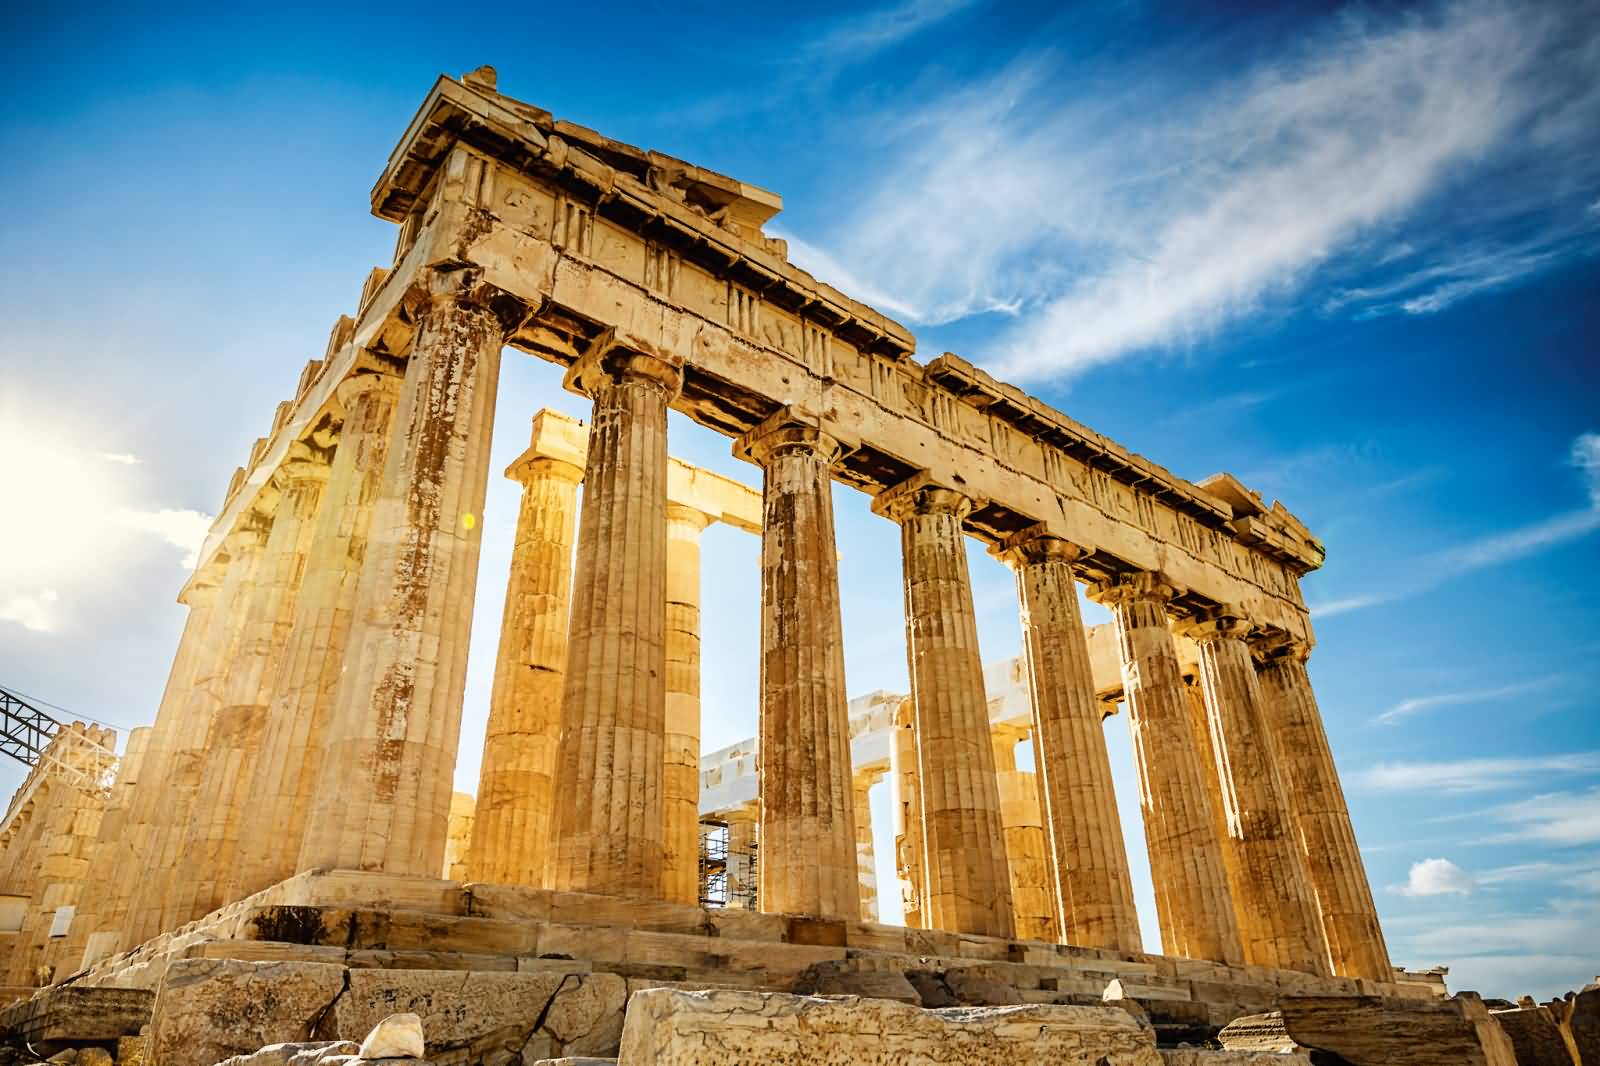 View of the Parthenon in athens, greece